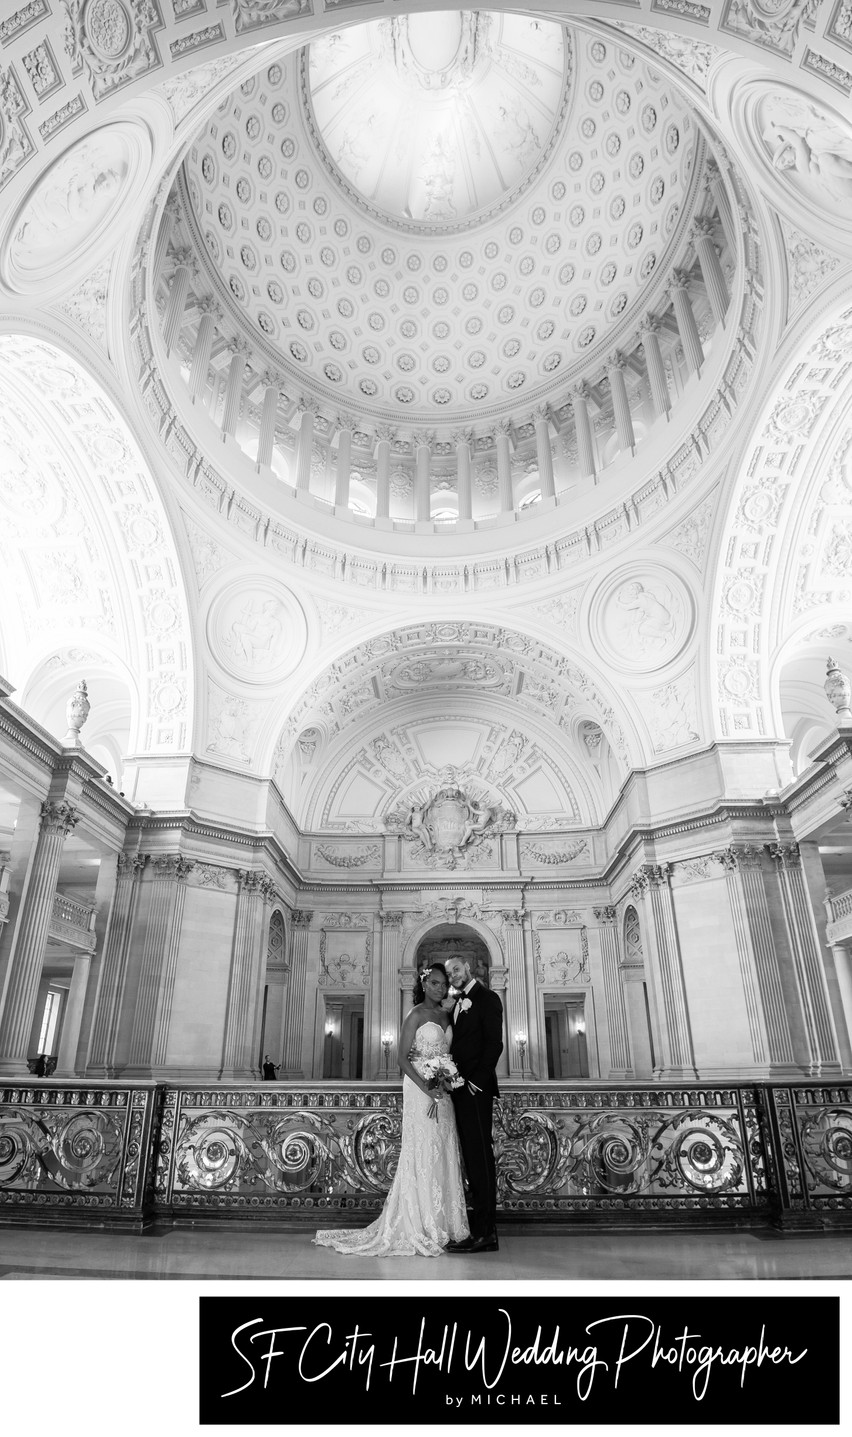 Wedding photography of San Francisco City Hall dome in black and white